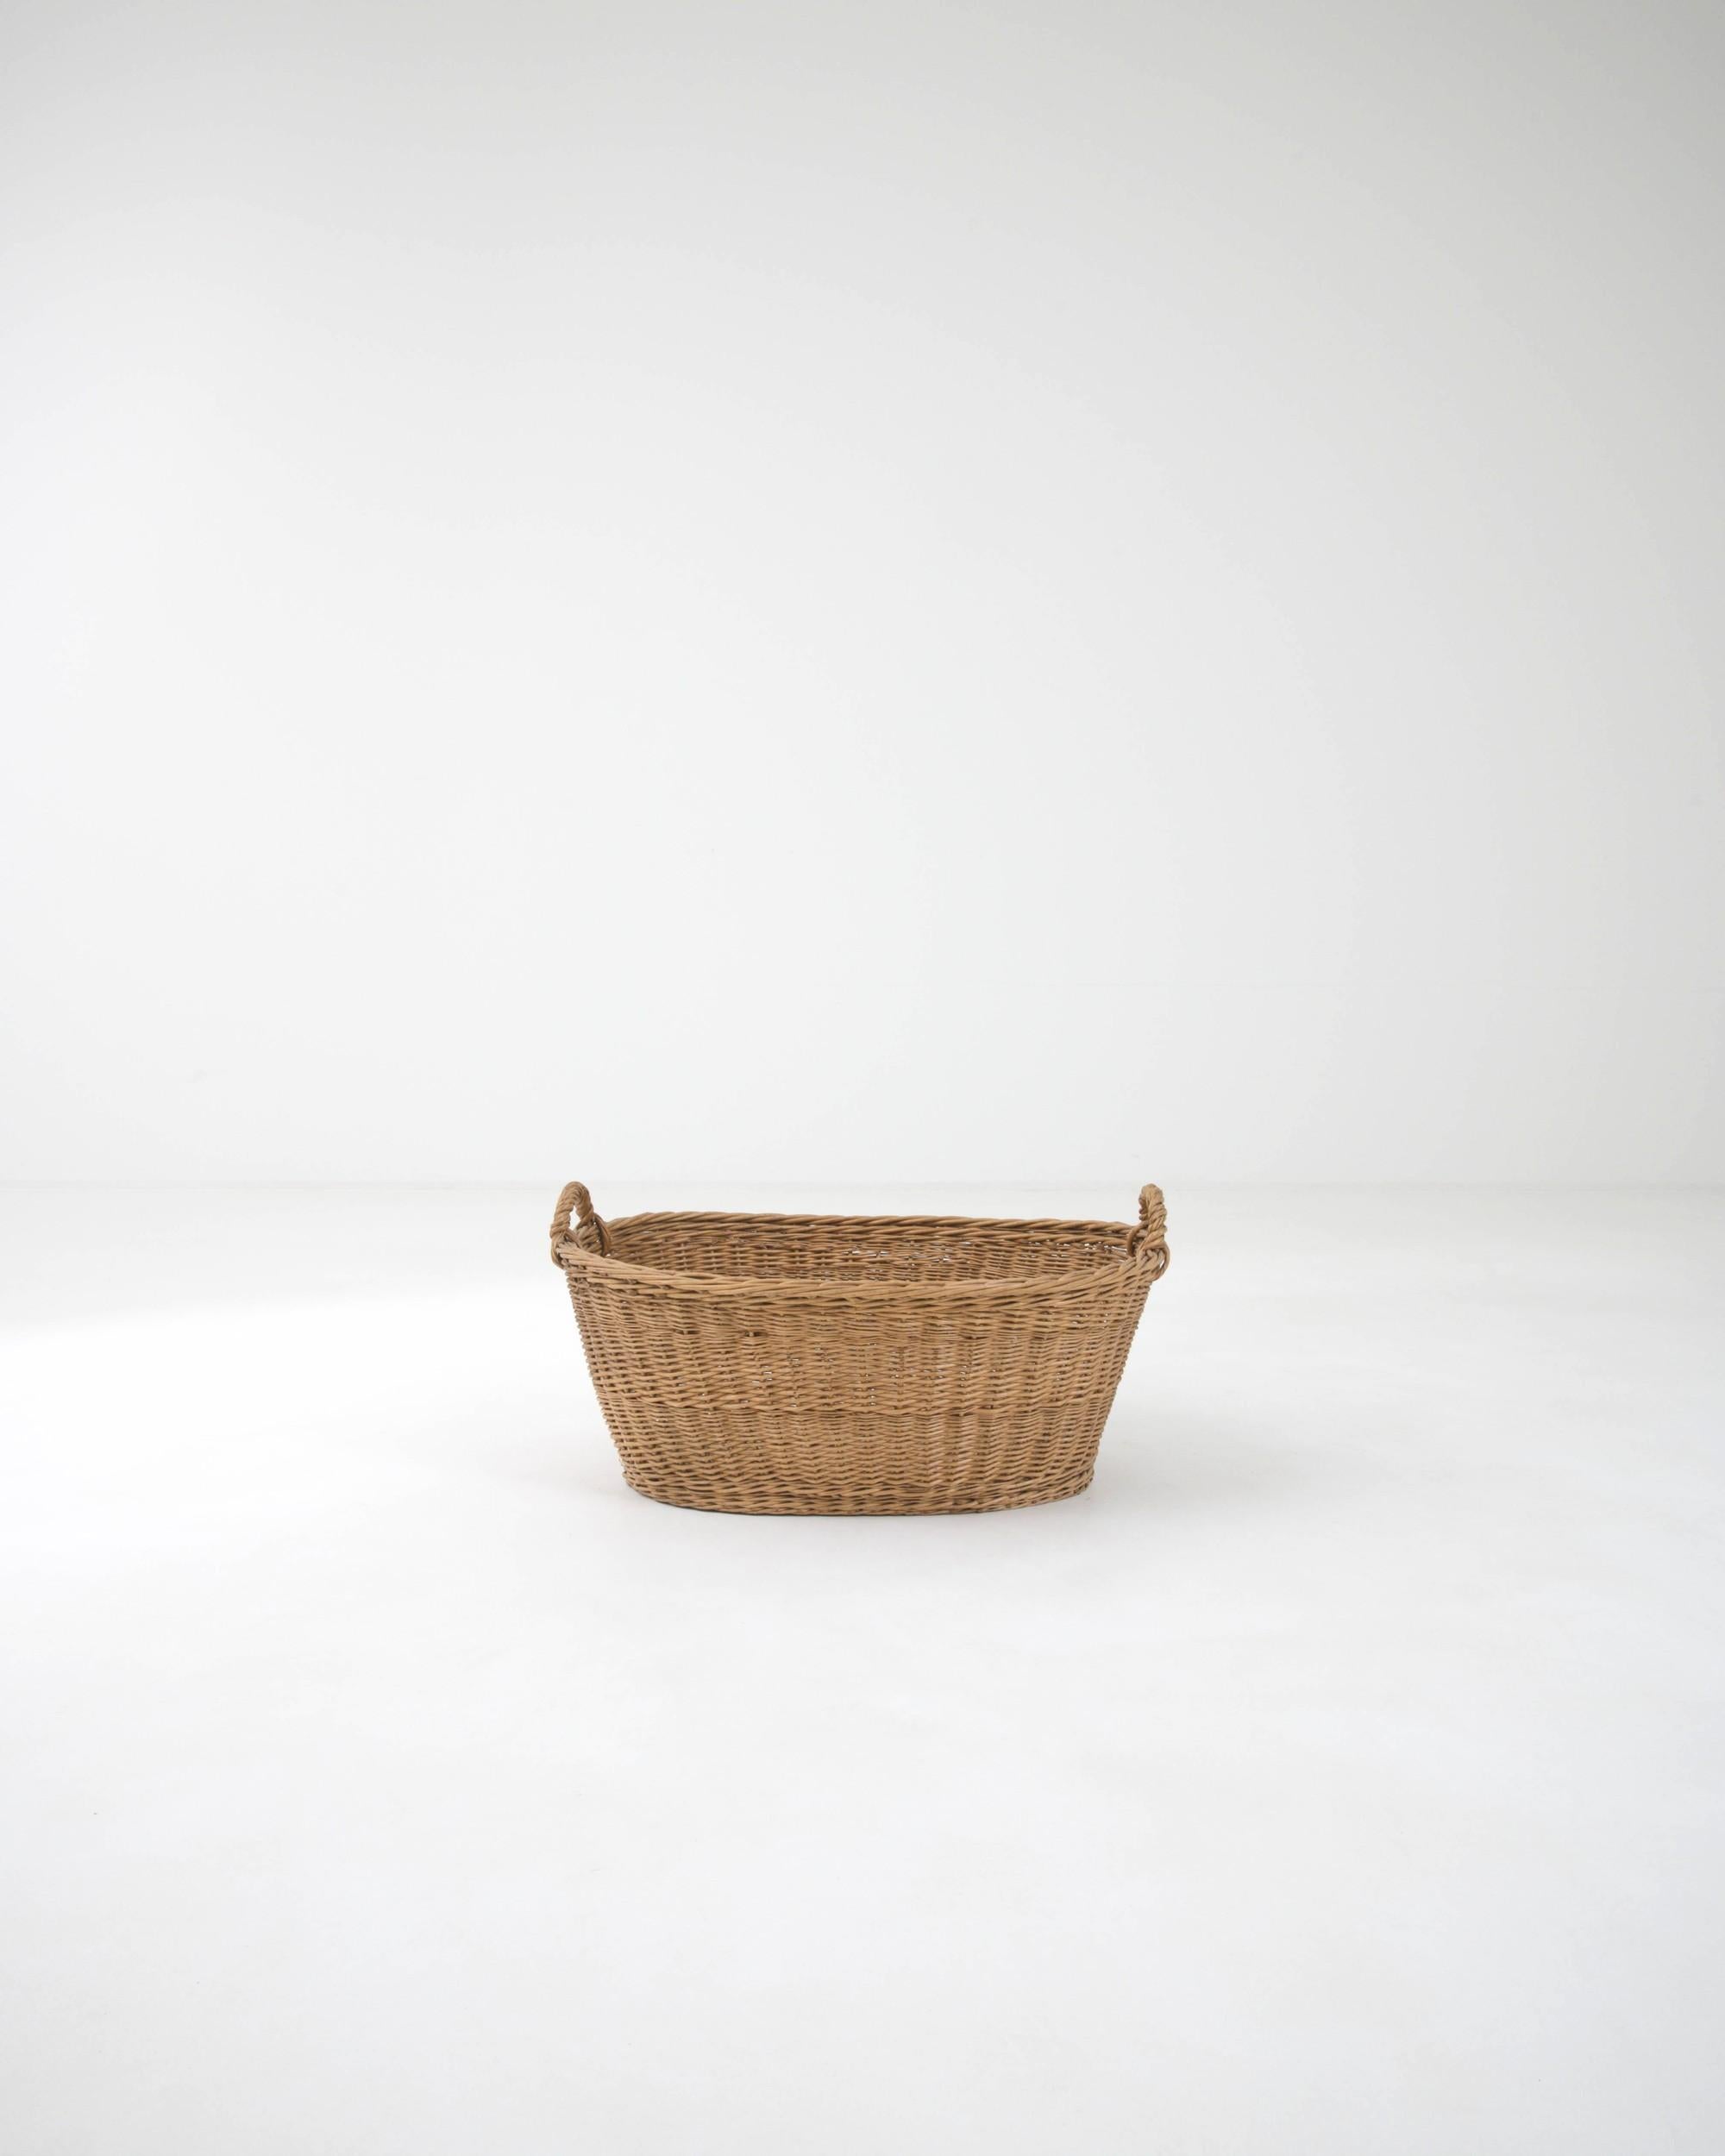 Hand-woven in France in the early 20th century, this wicker basket boasts a practical shape while the craftsmanship of the weaving technique imparts a sense of rustic coziness.Light and easily transportable, this classic wicker basket is ready to